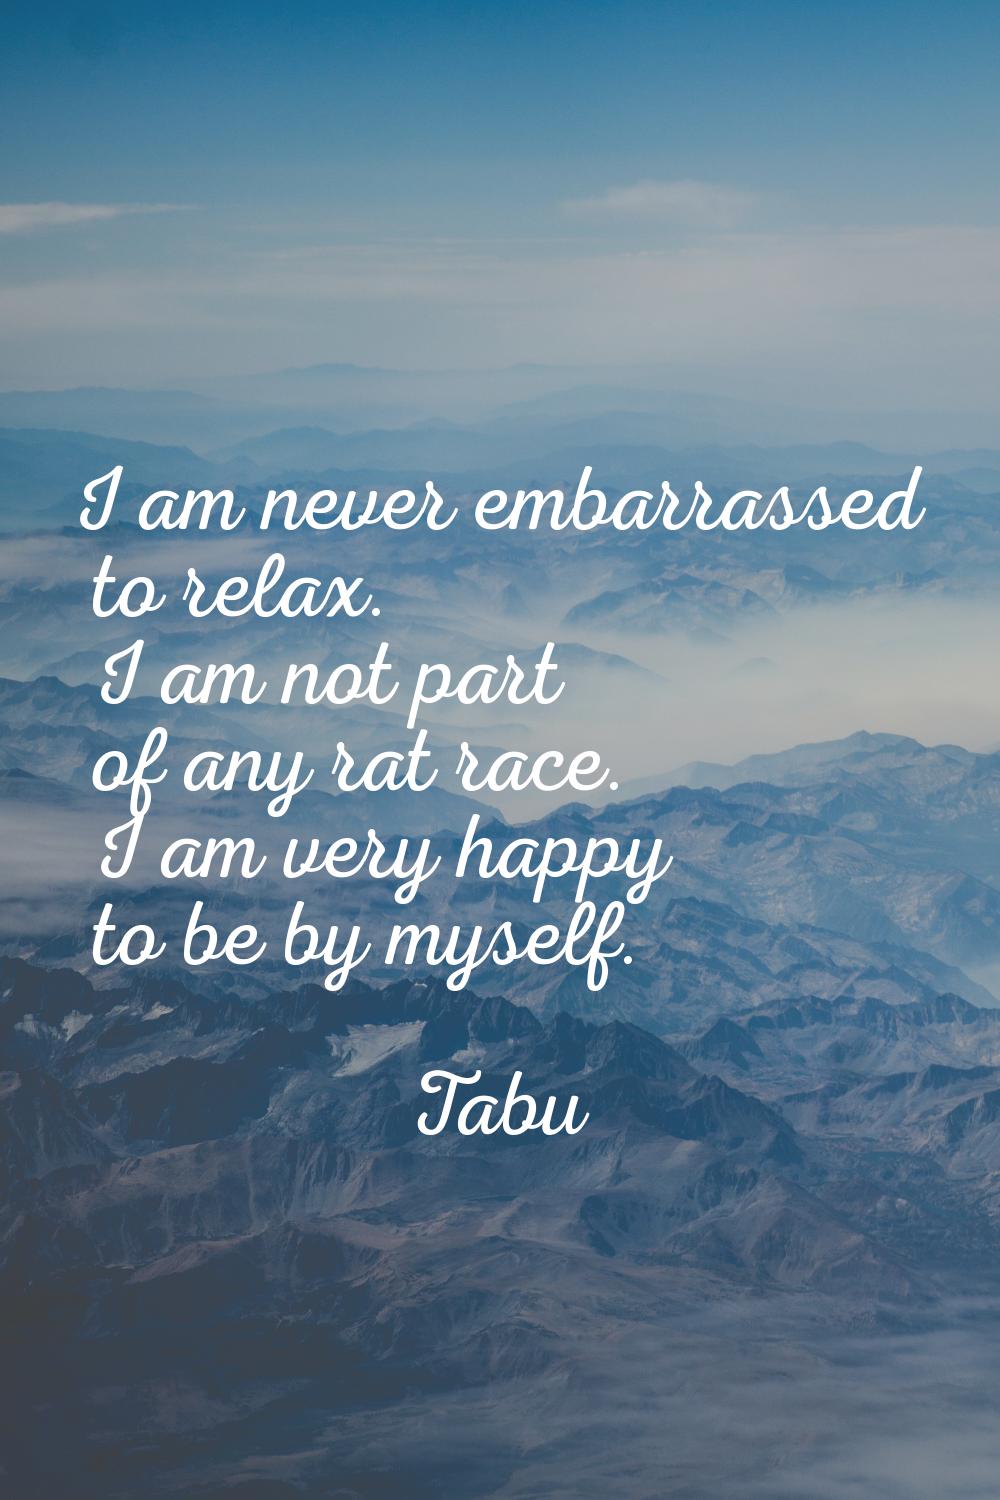 I am never embarrassed to relax. I am not part of any rat race. I am very happy to be by myself.